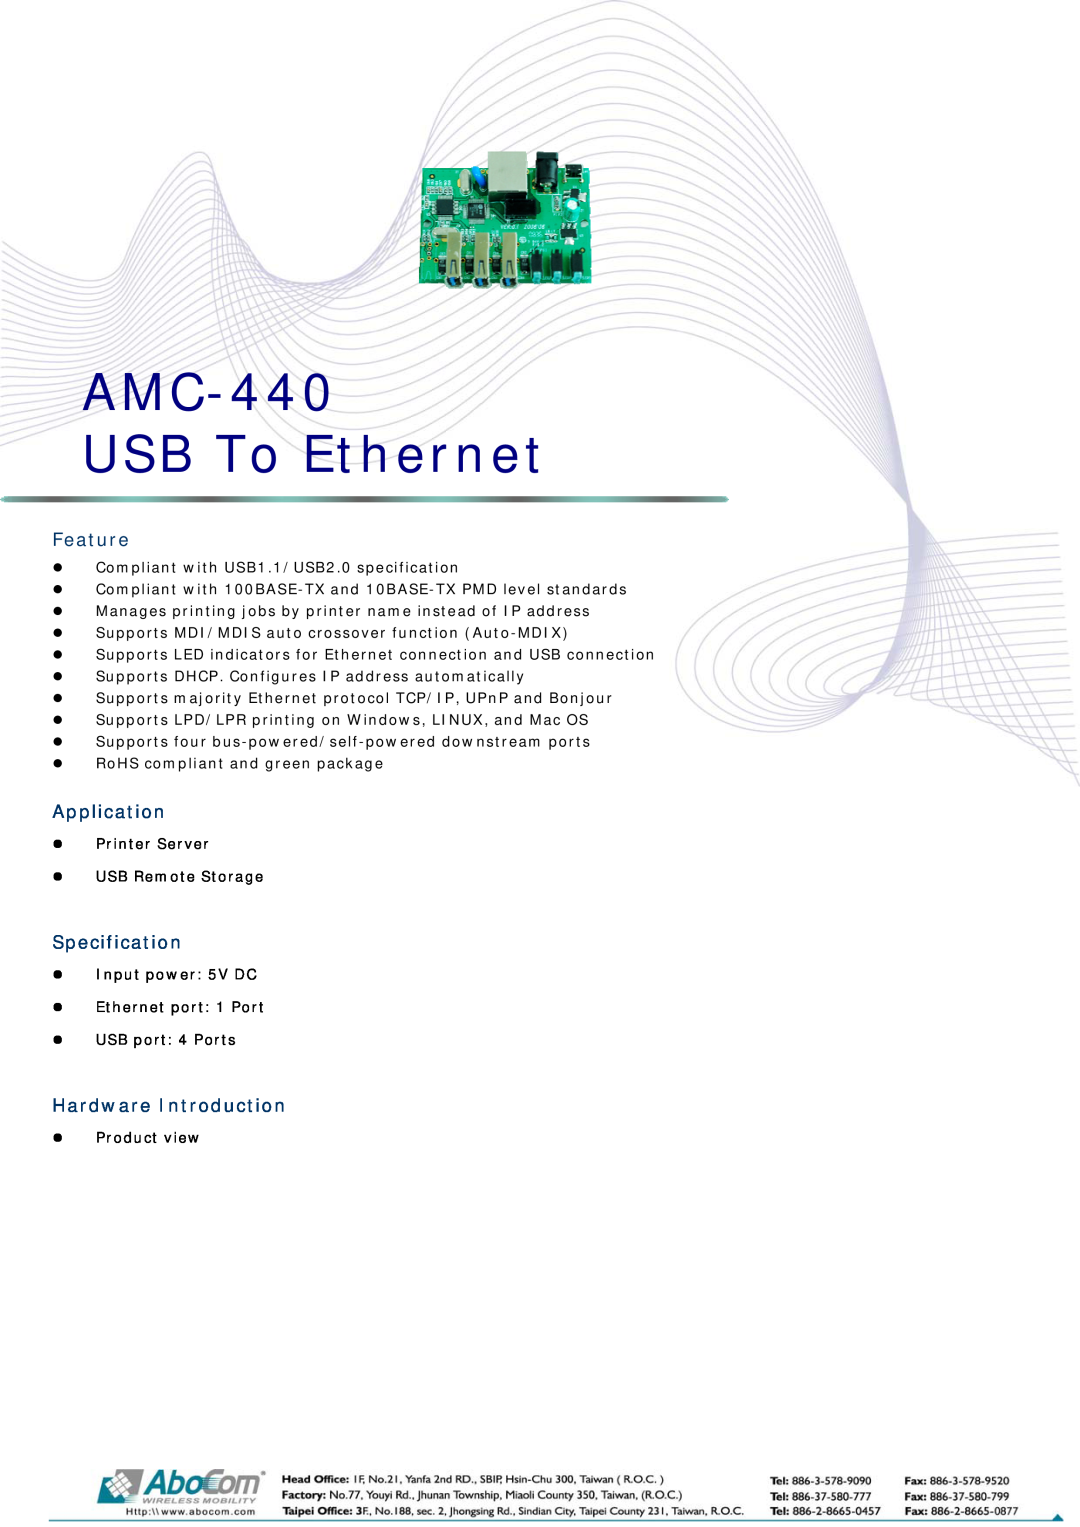 Abocom manual AMC-440 USB To Ethernet, Feature, Application, Specification, Hardware Introduction 